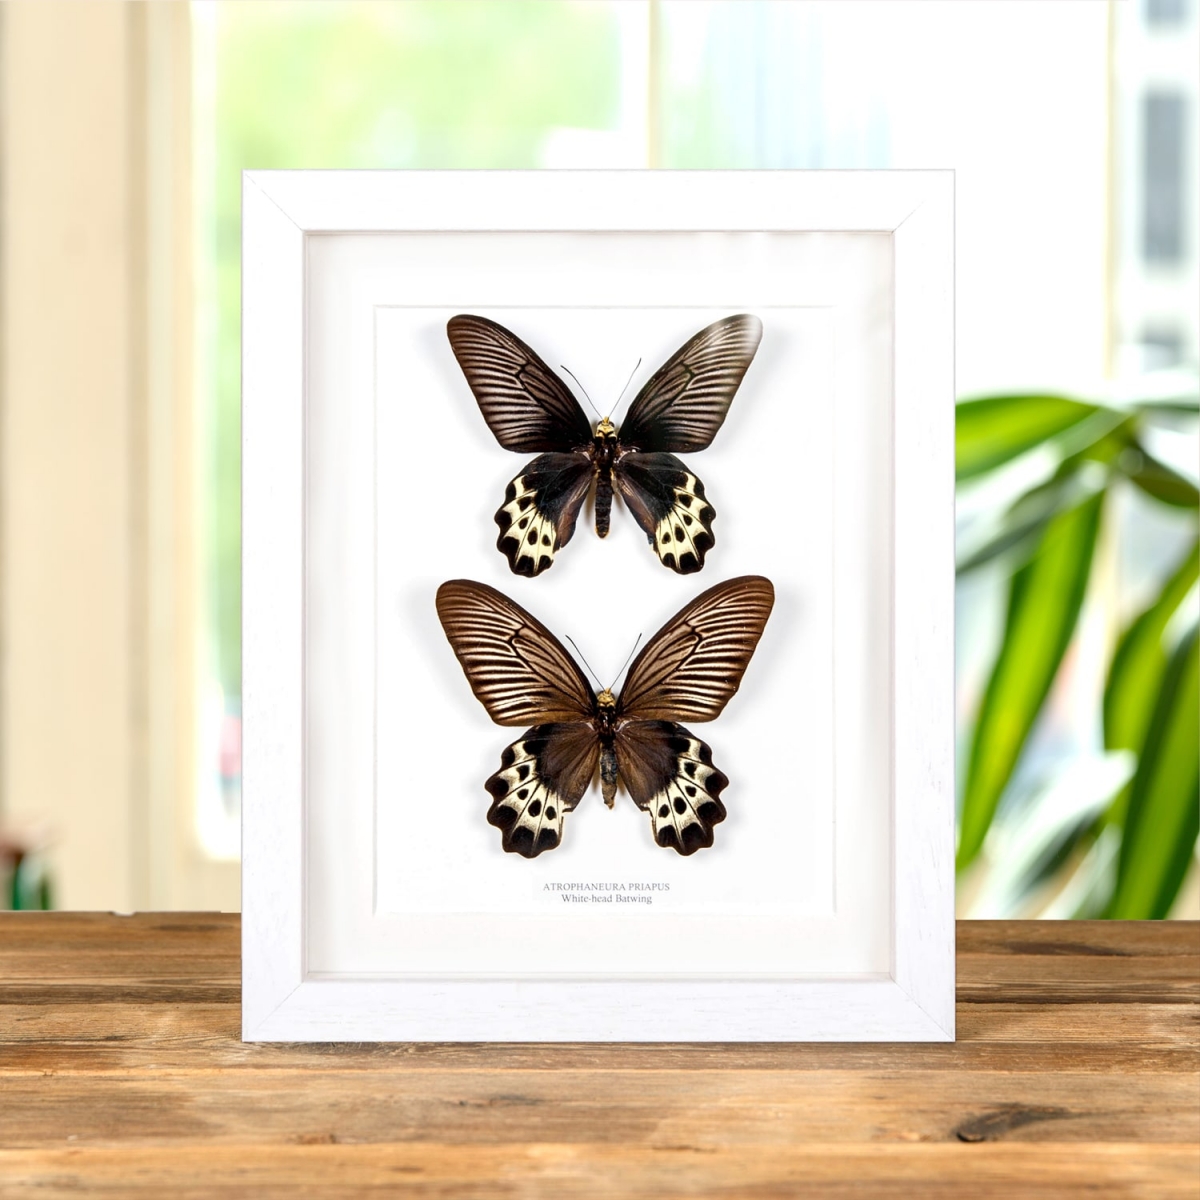 White-Head Batwing Butterfly Male & Female In Box Frame (Atrophaneura priapus)